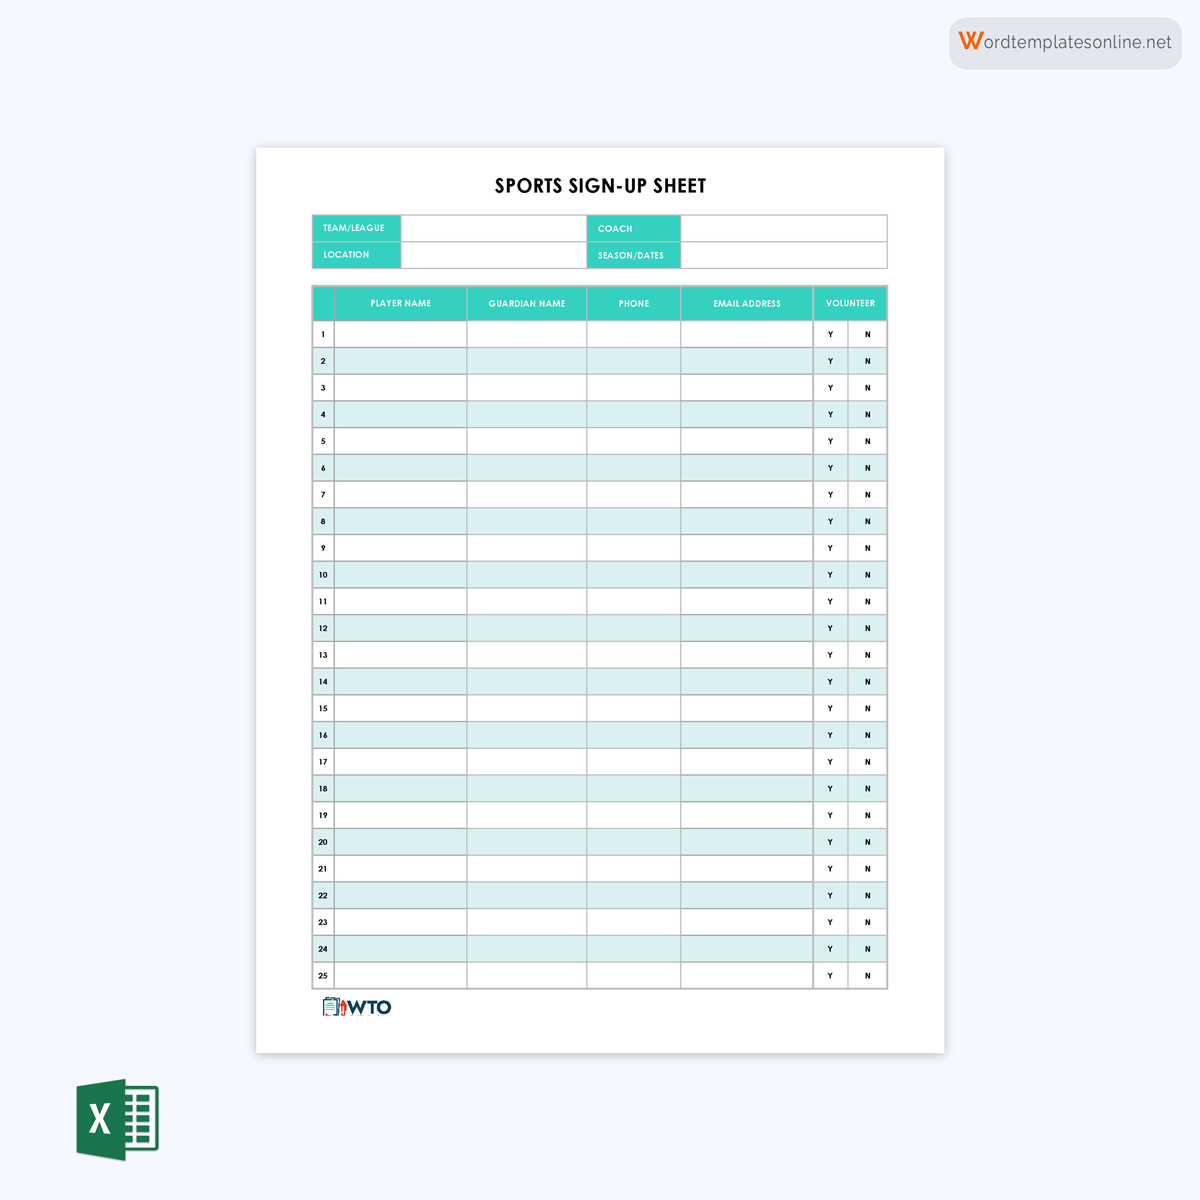 Basic Sports Sign-Up Sheet free download in ms word